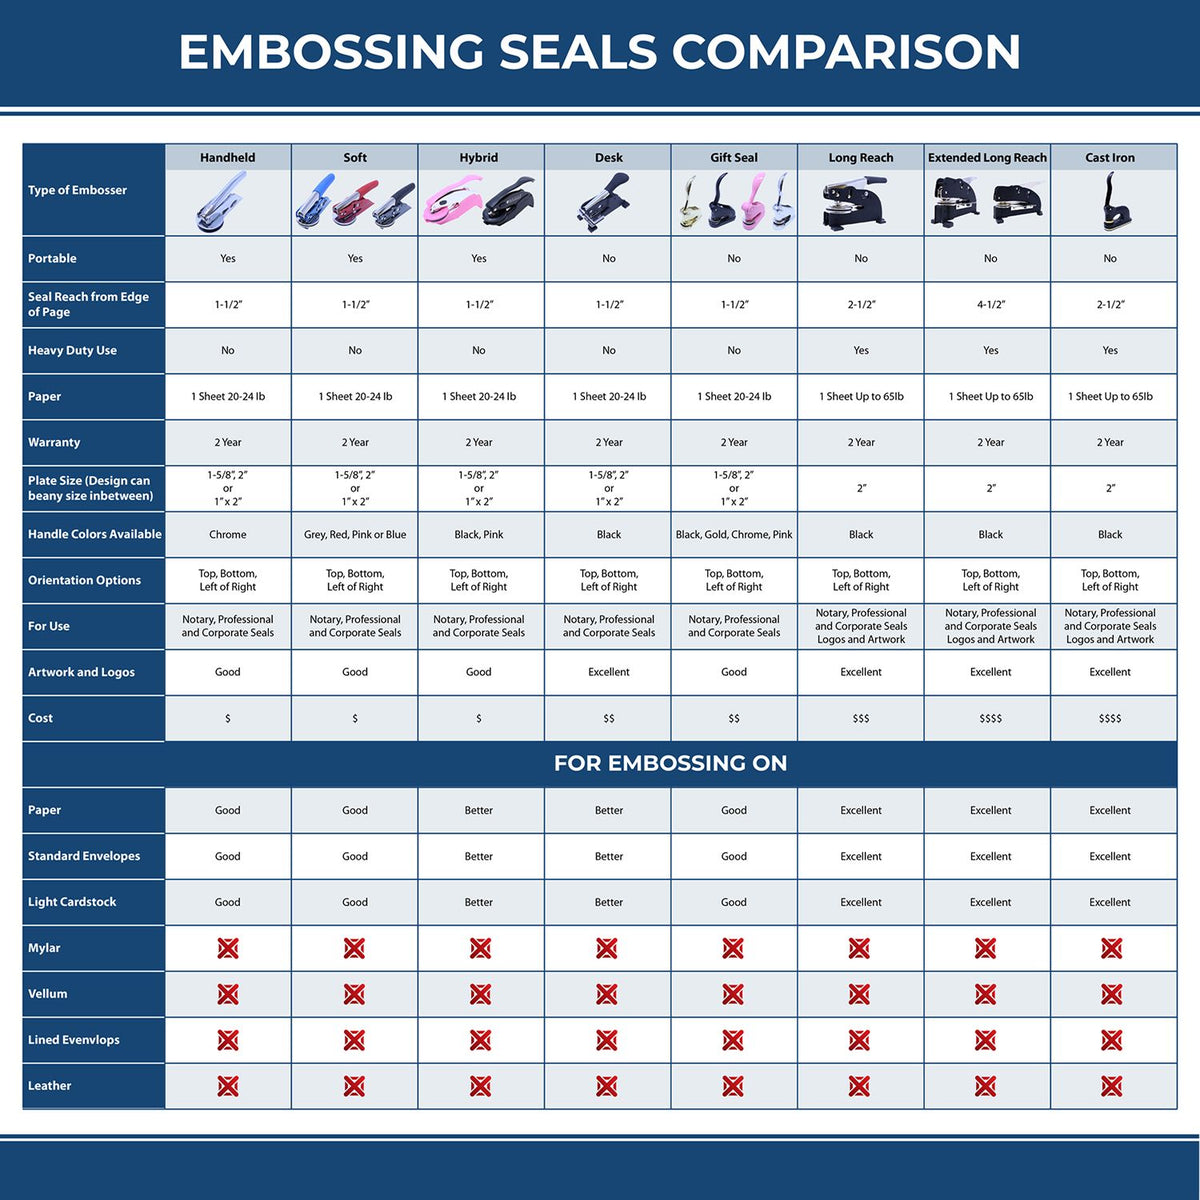 A comparison chart for the different types of mount models available for the Handheld Vermont Professional Geologist Embosser